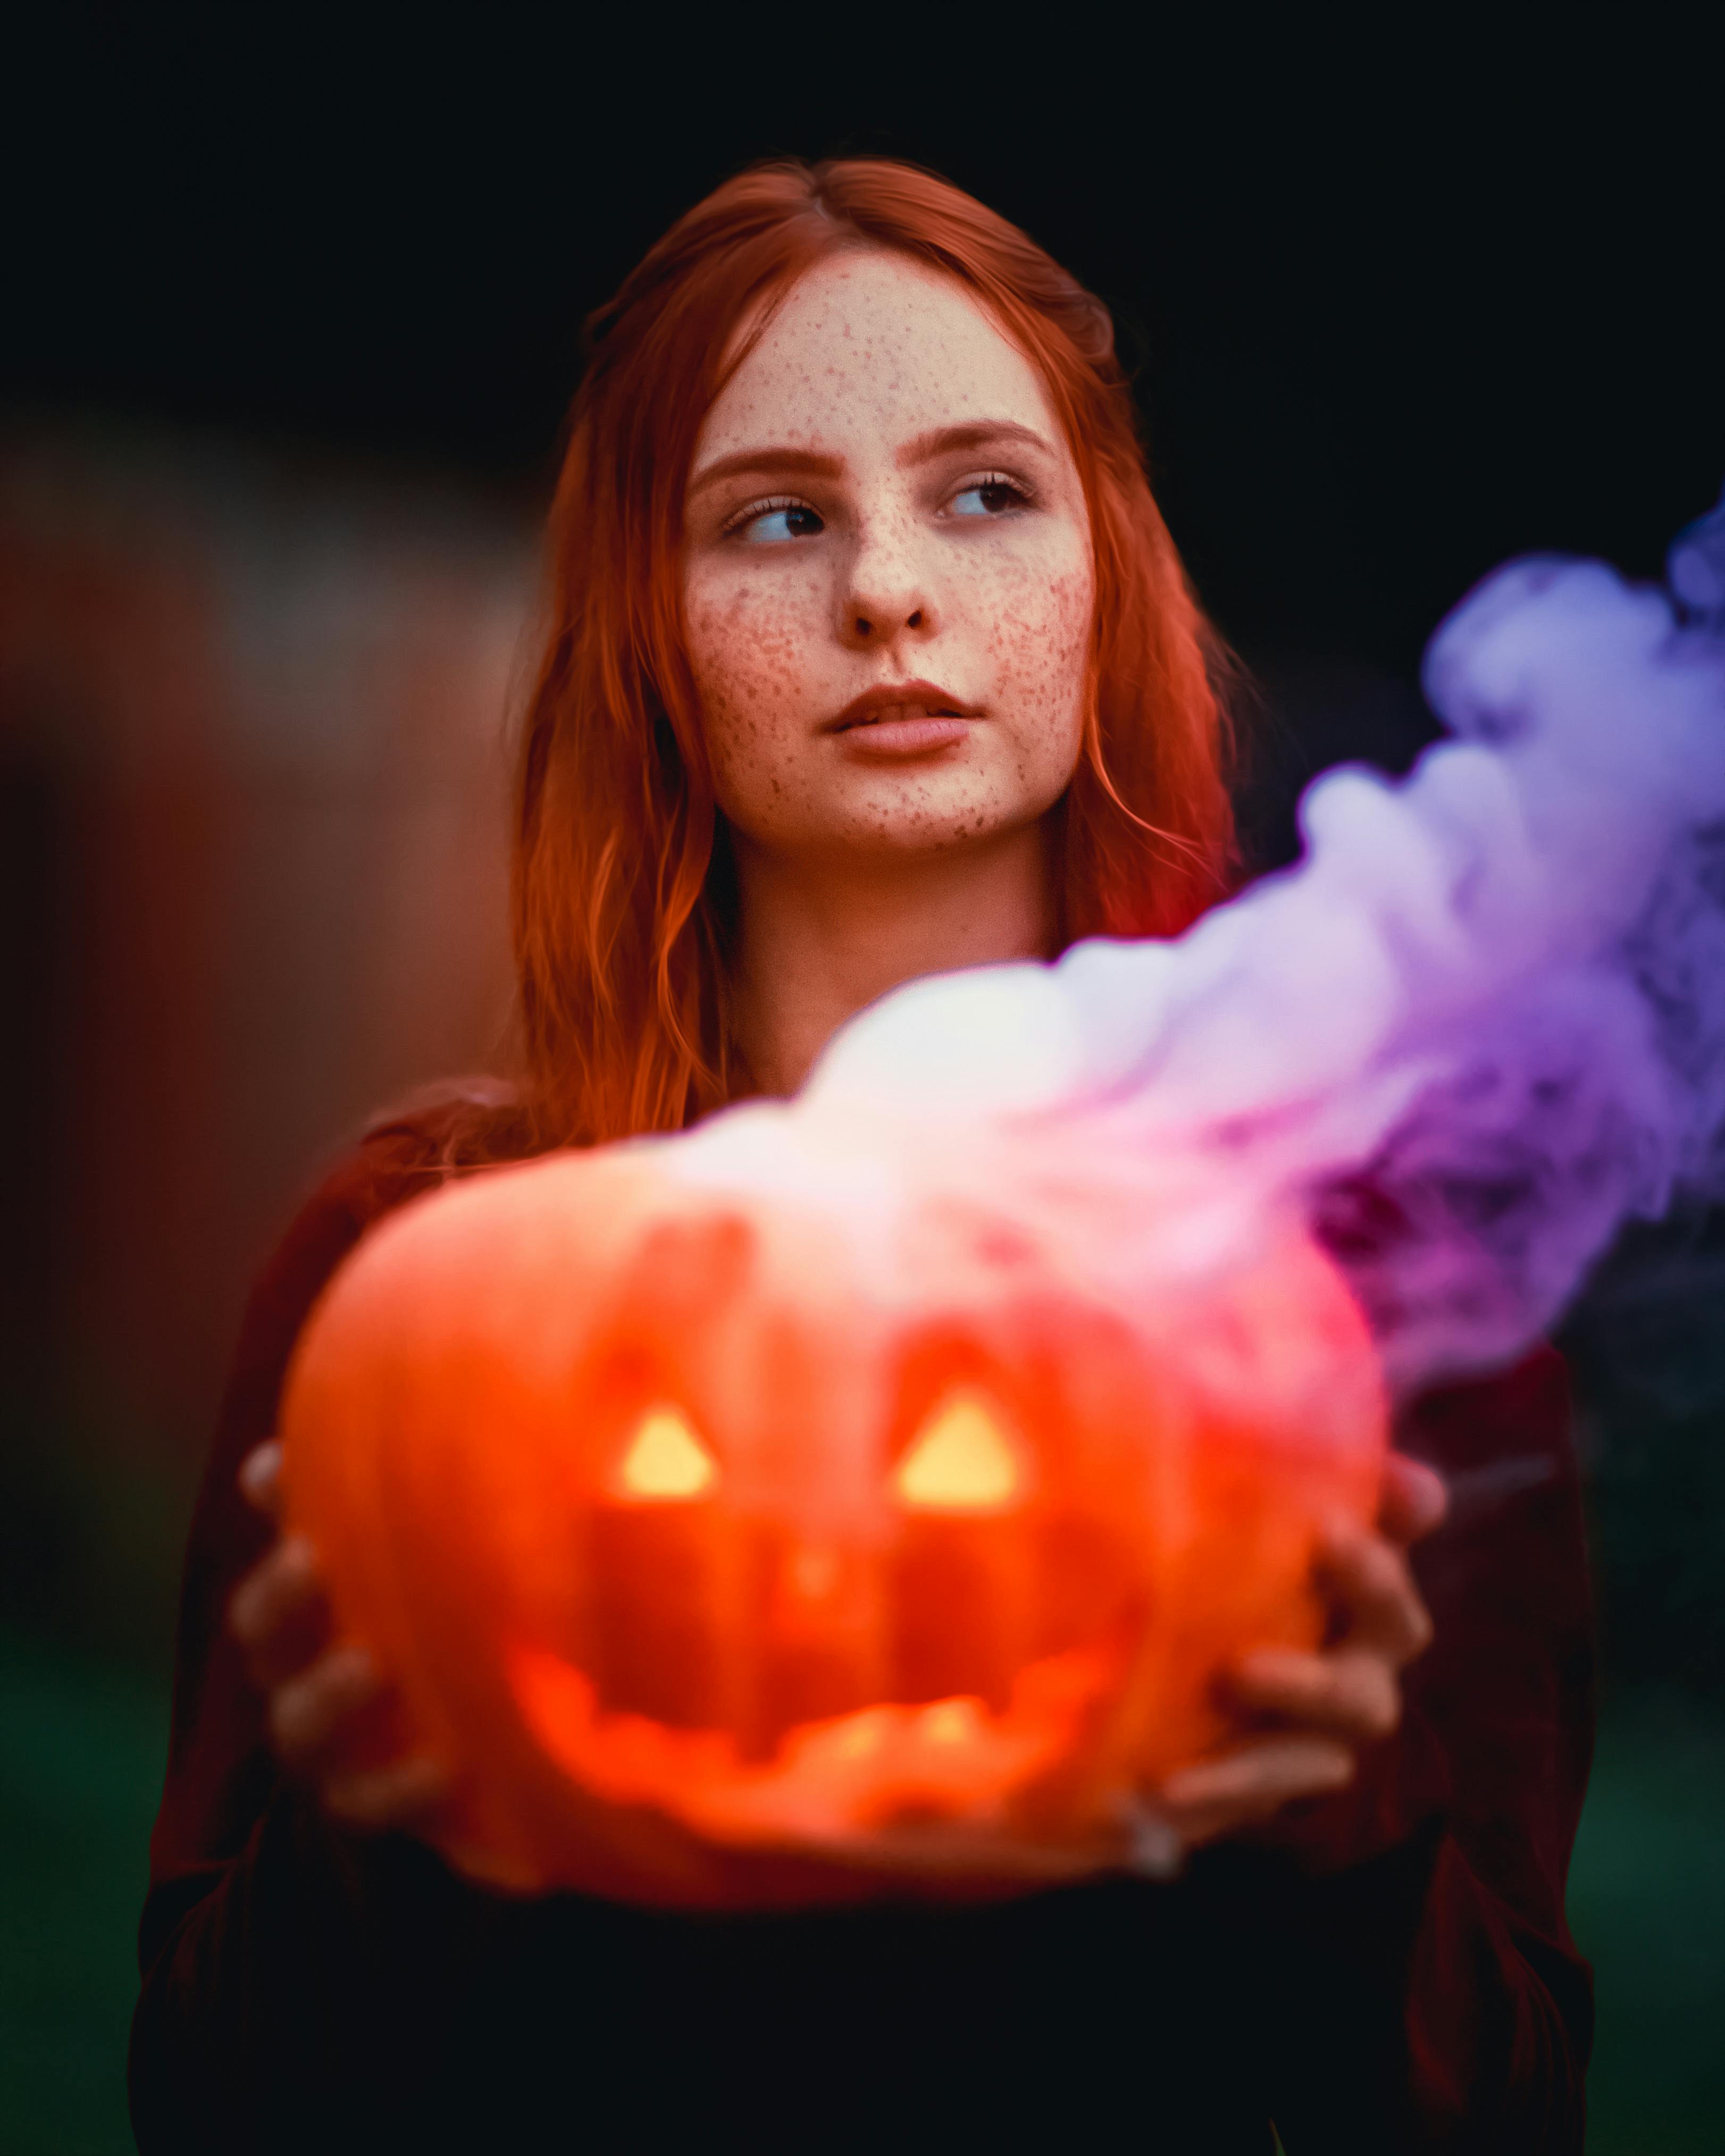 Woman With A Jack O Lantern On Her Head Photos, Download The BEST Free ...